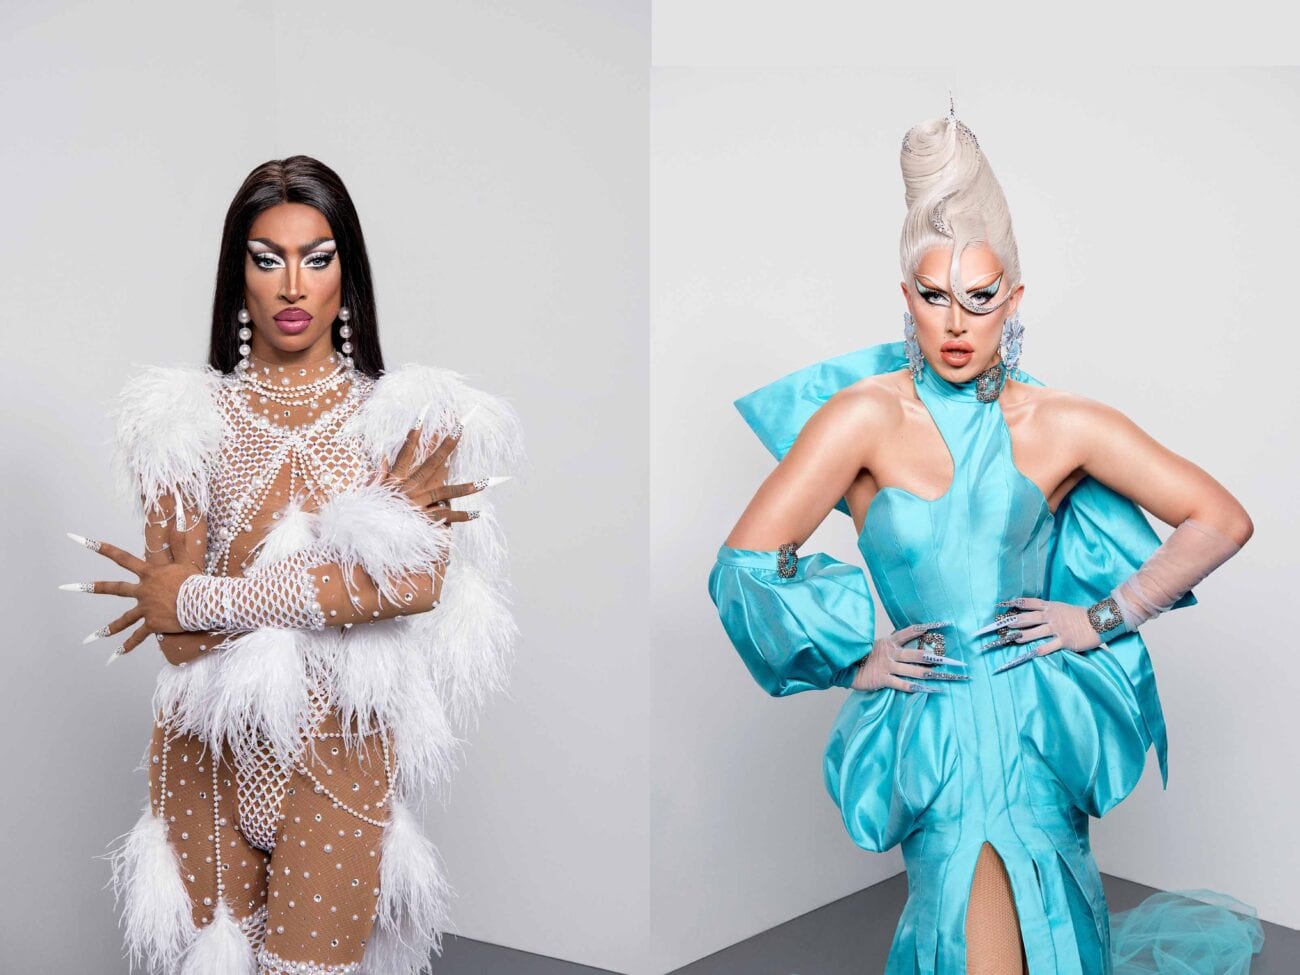 Tayce and A'Whora are the most iconic duo in 'Drag Race' herstory, let alone 'Drag Race UK'. Mourn their separation with these lovely moments.